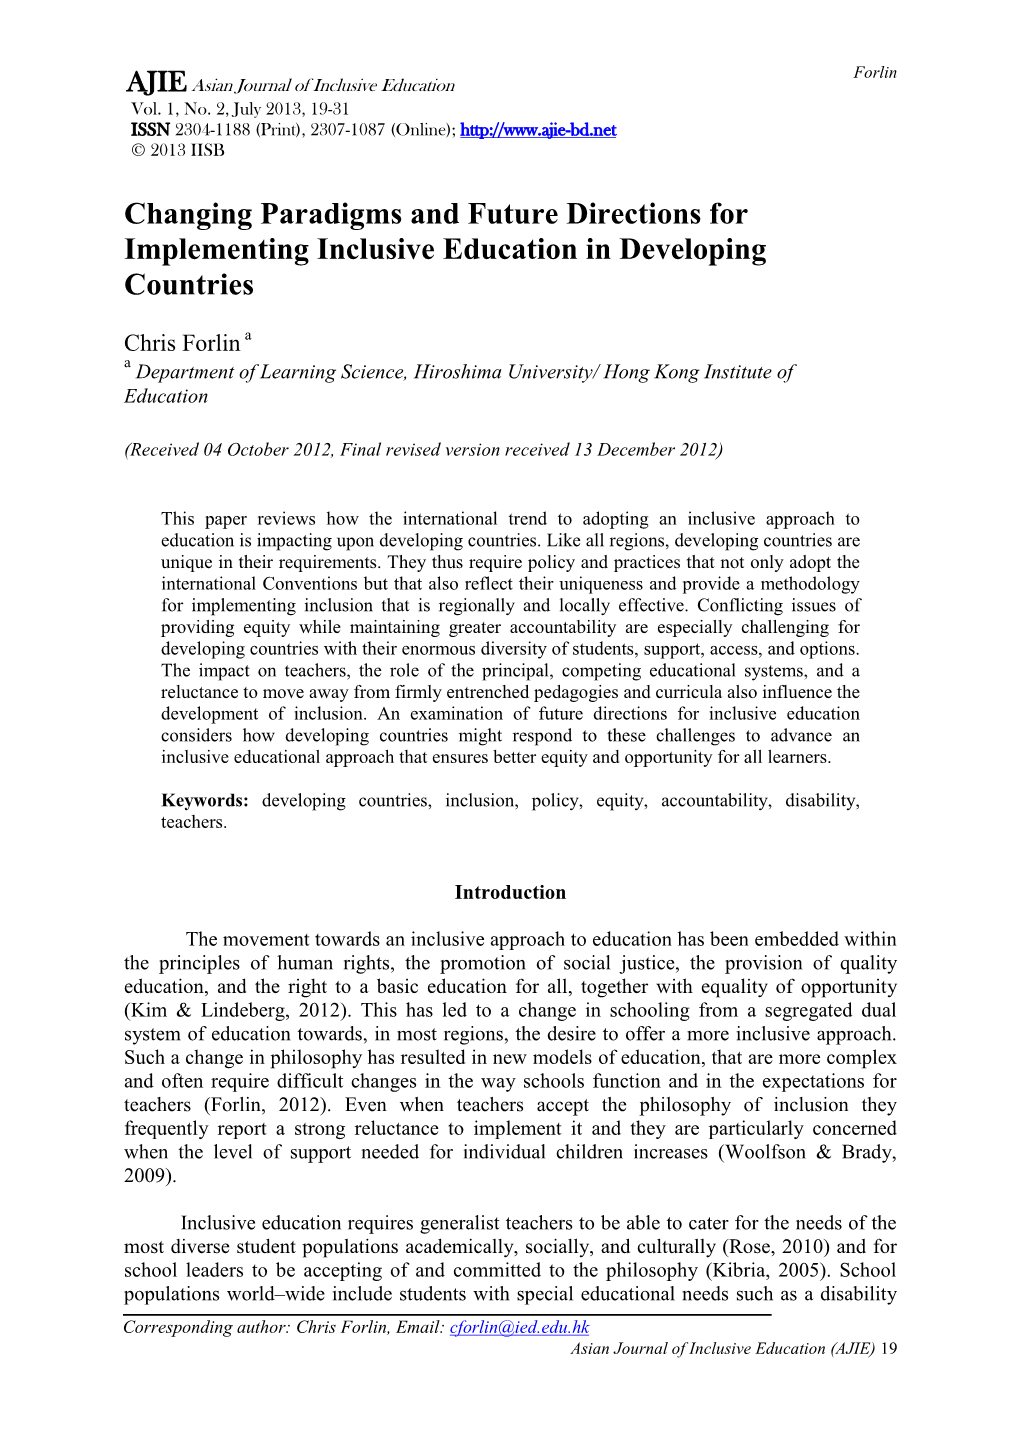 Changing Paradigms and Future Directions for Implementing Inclusive Education in Developing Countries